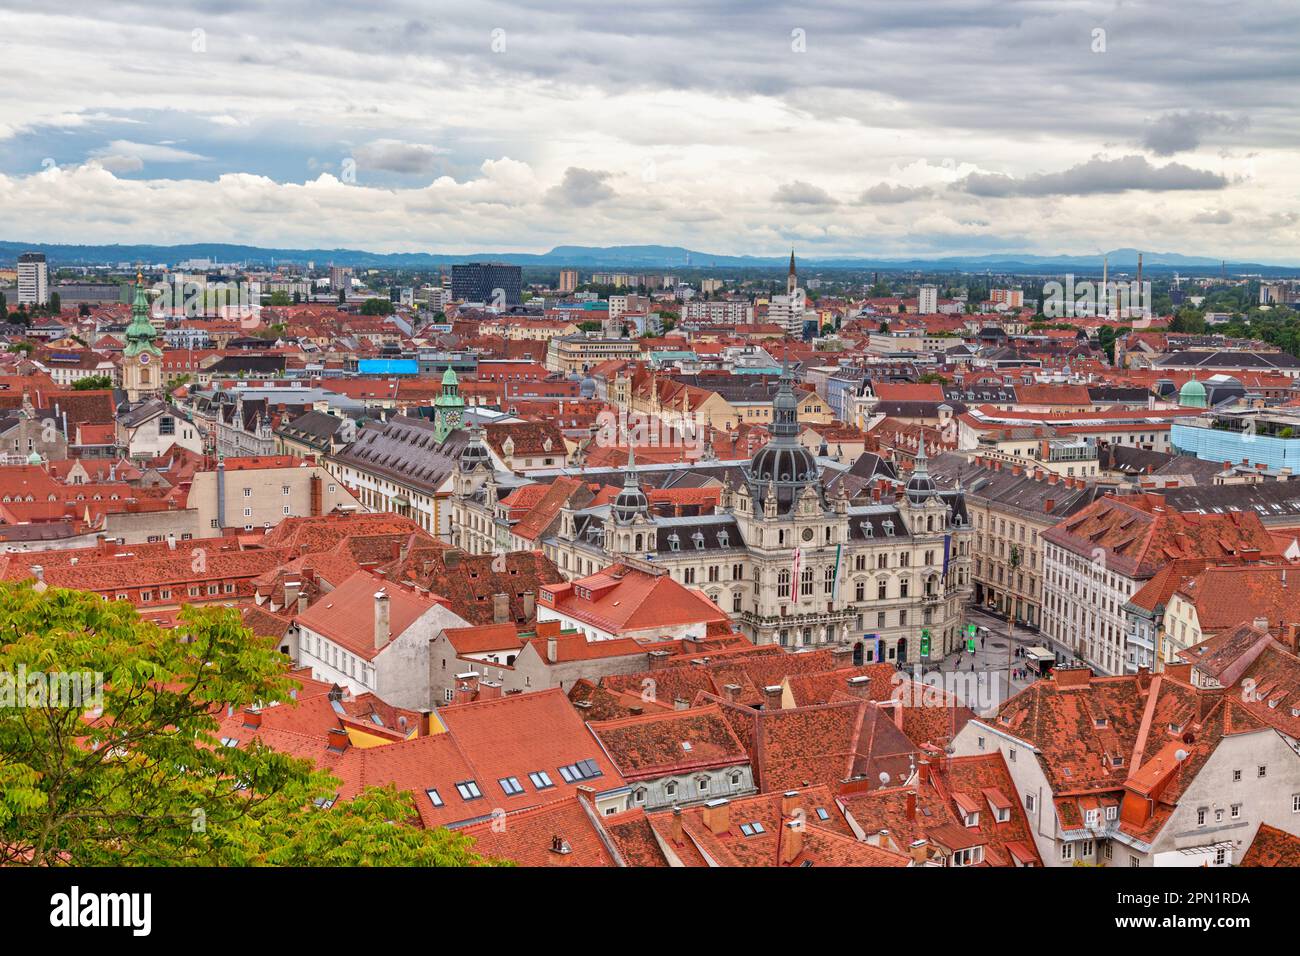 Graz, Austria - May 28 2019: The town hall of Graz (German: Grazer Rathaus) houses the official residence of the mayor of Graz, the local council and Stock Photo